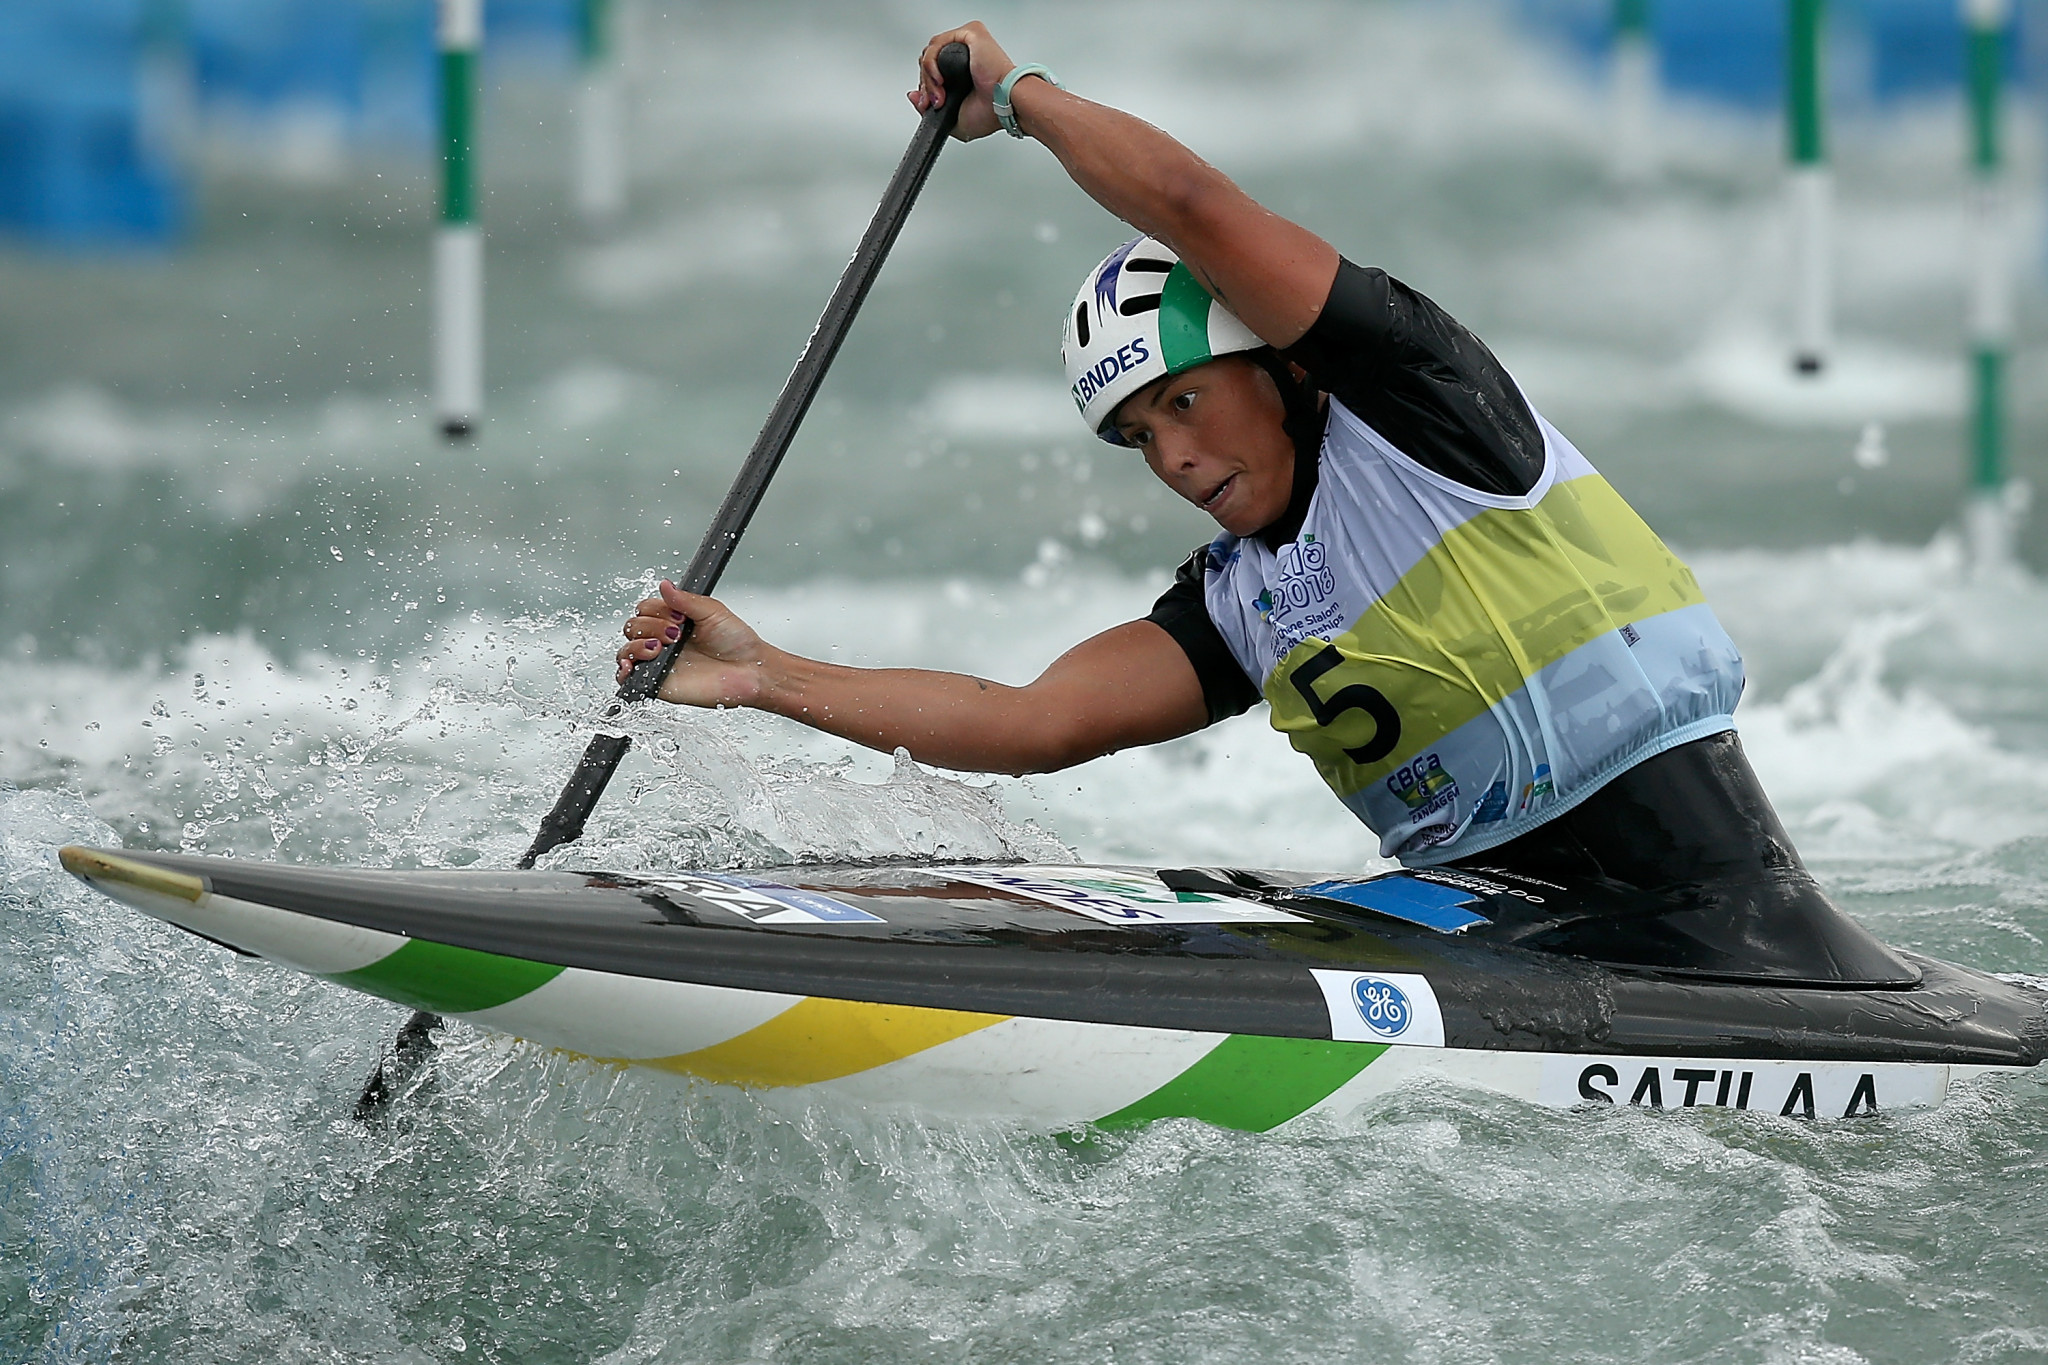 Brazil's Ana Sátila was the victor in the women's C1 ©Getty Images